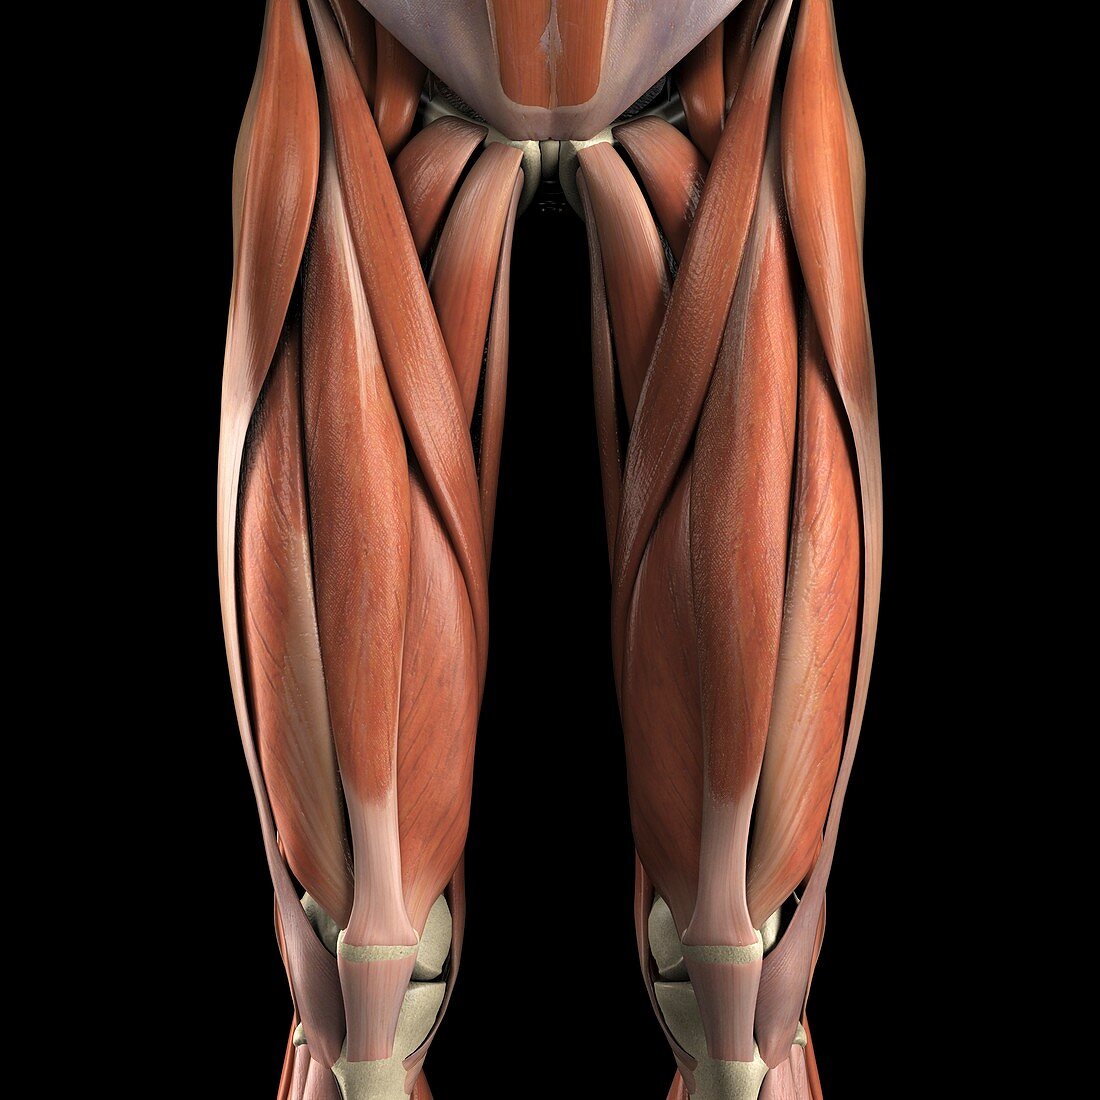 Muscles of the Upper Legs, artwork